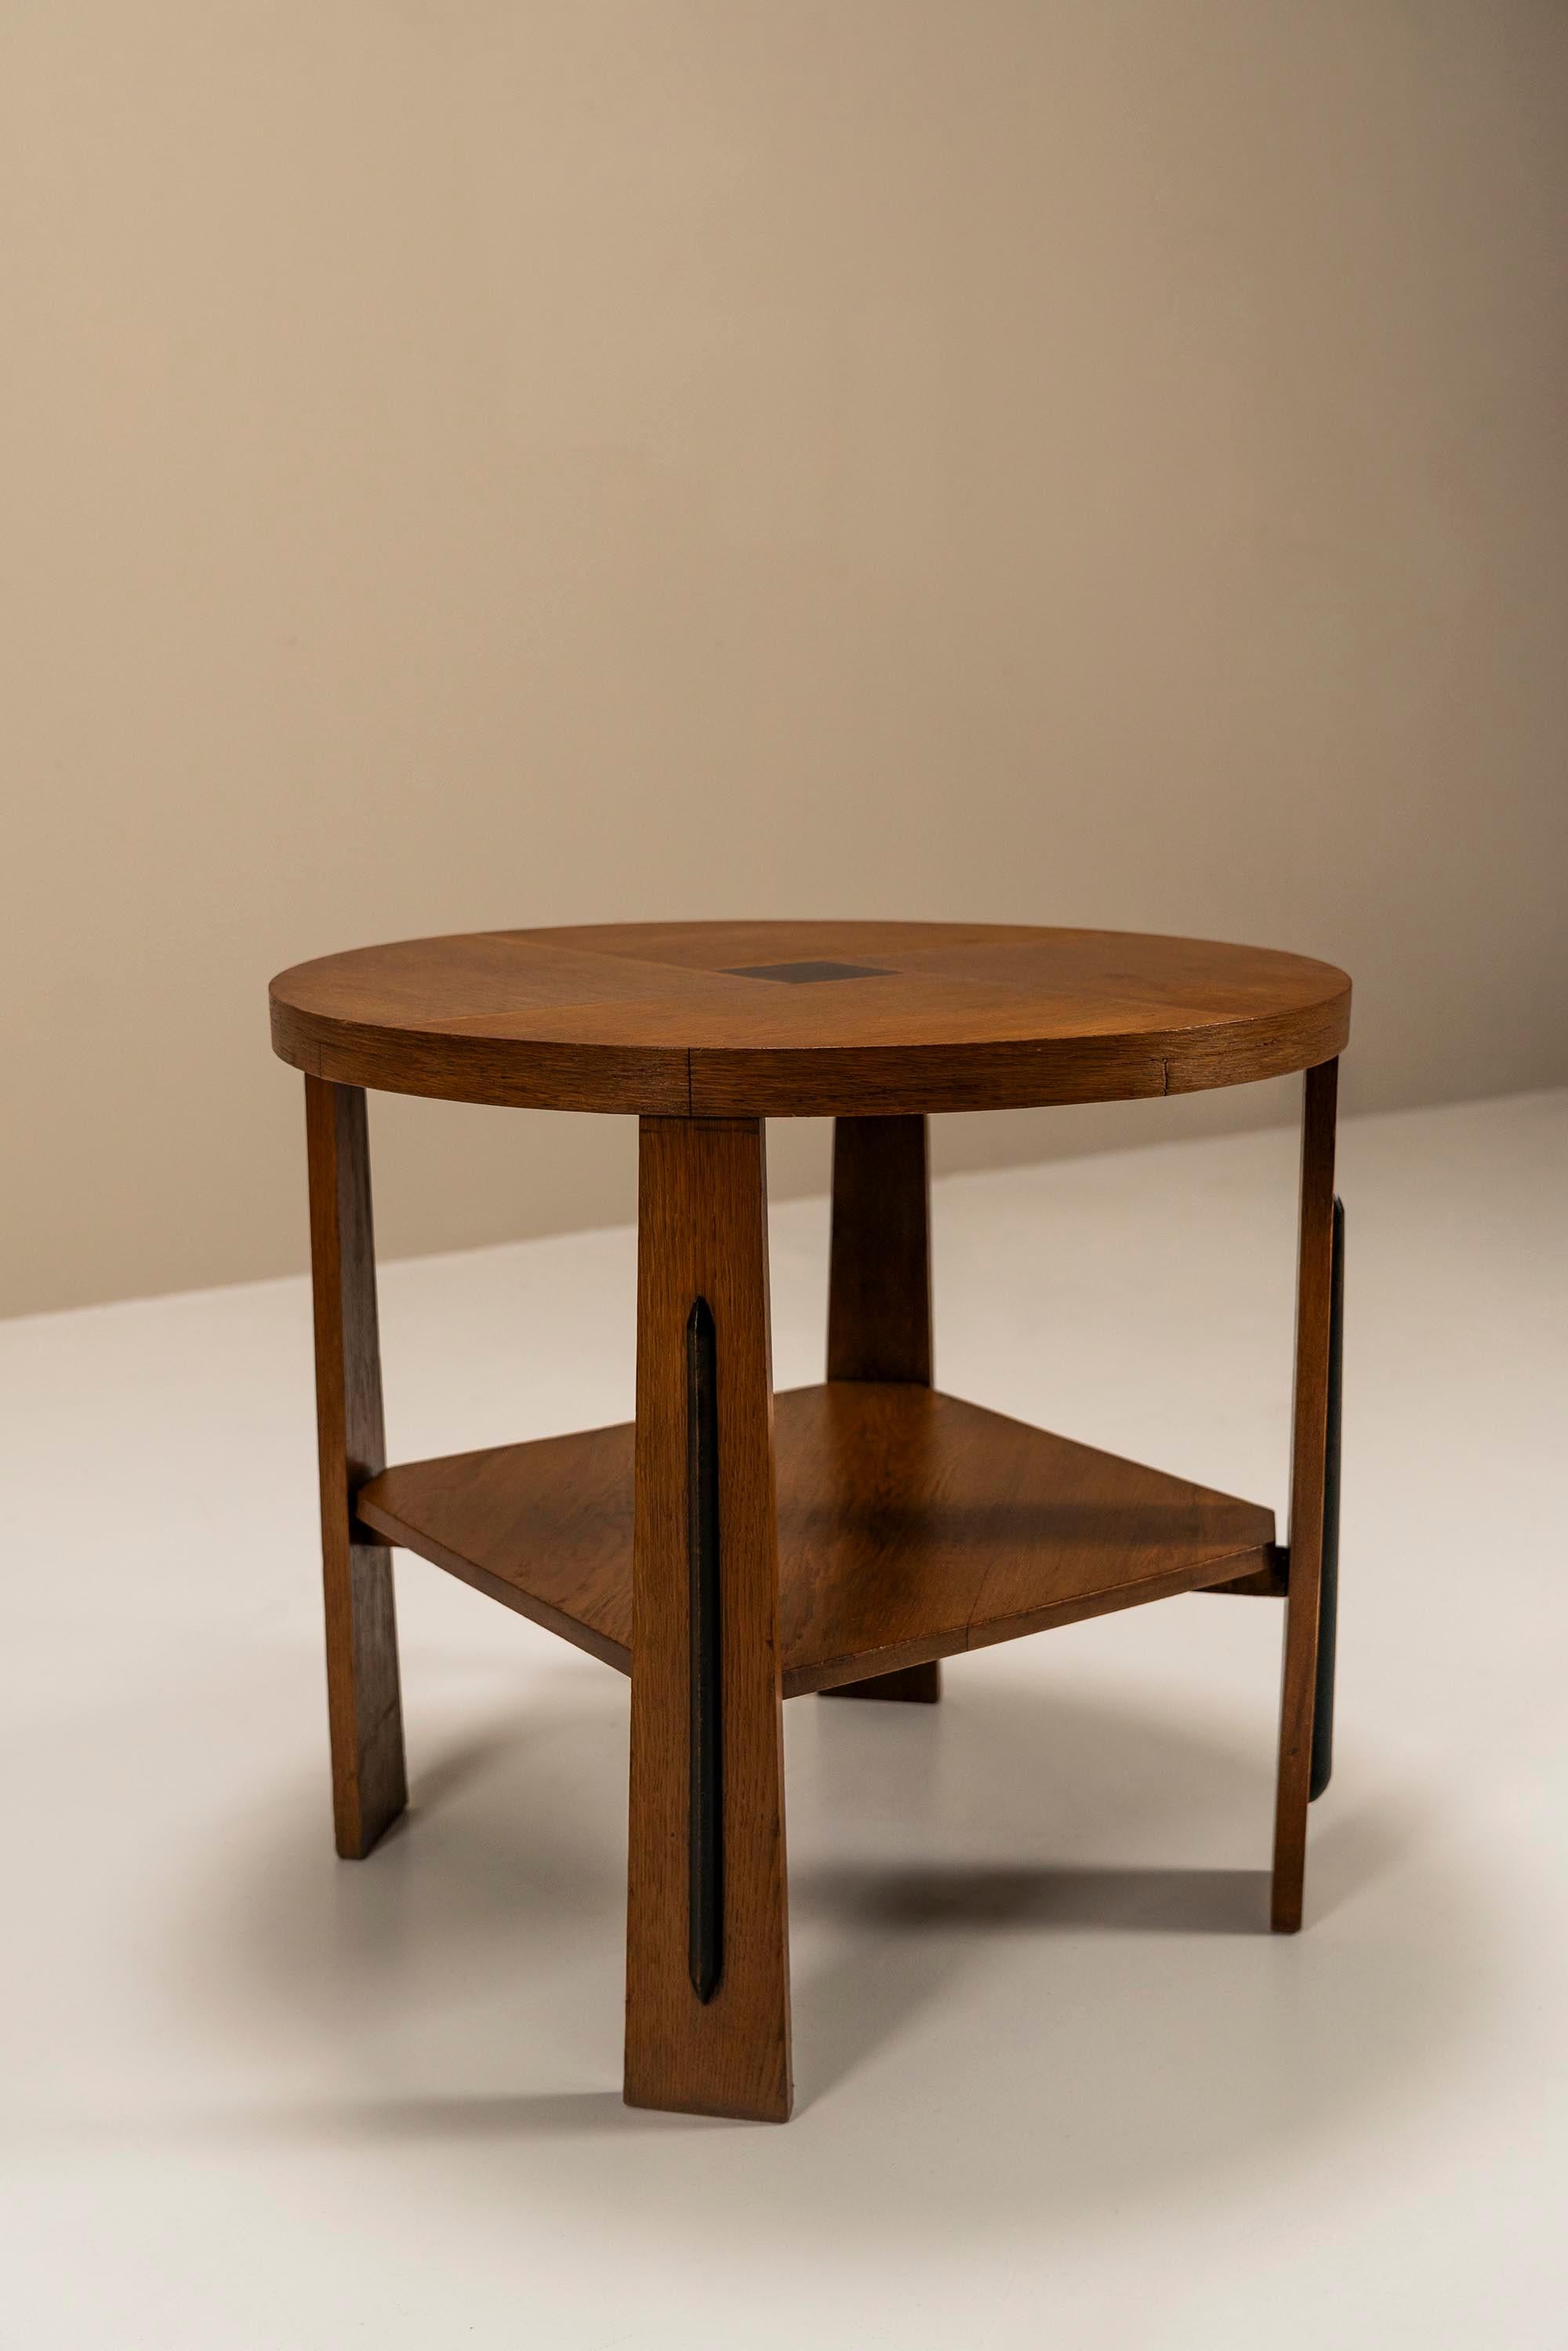 Dutch Amsterdam School Side Table In Oak With Ebony Accent, The Netherlands 1930's